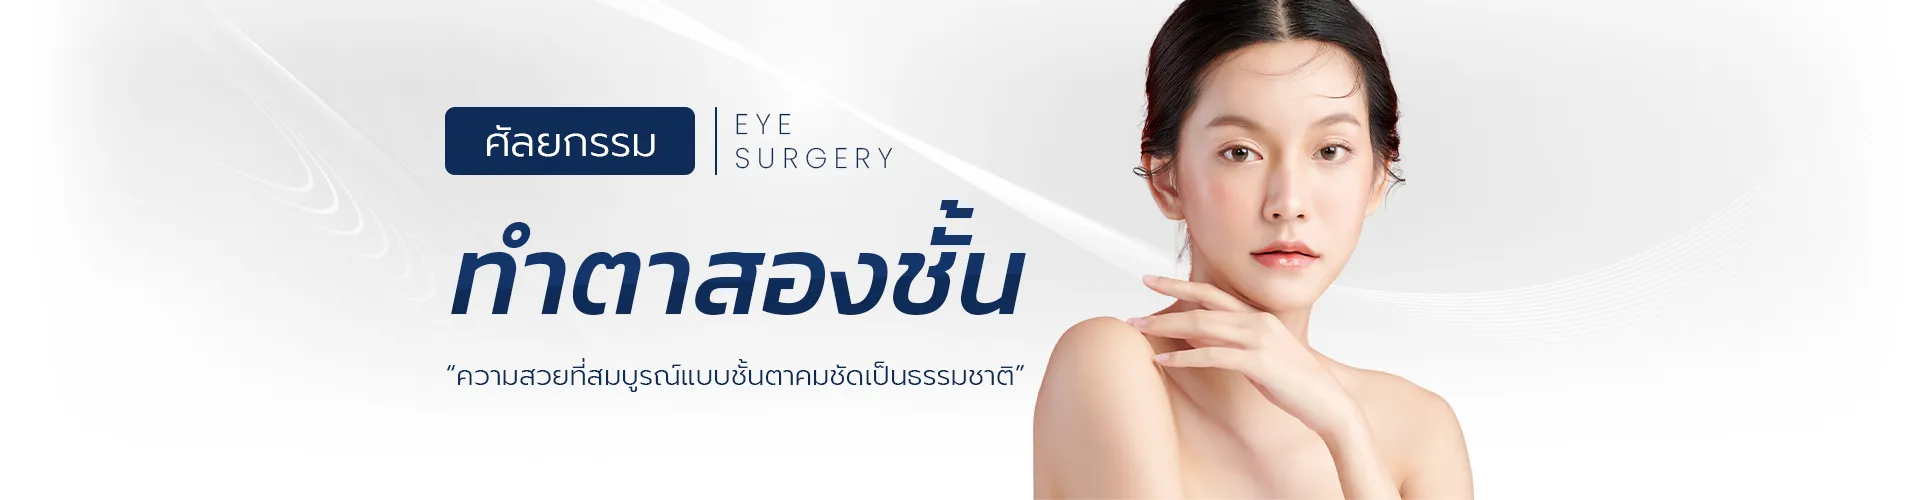 Hairline Lowering Surgery Female, ทำตาสองชั้น